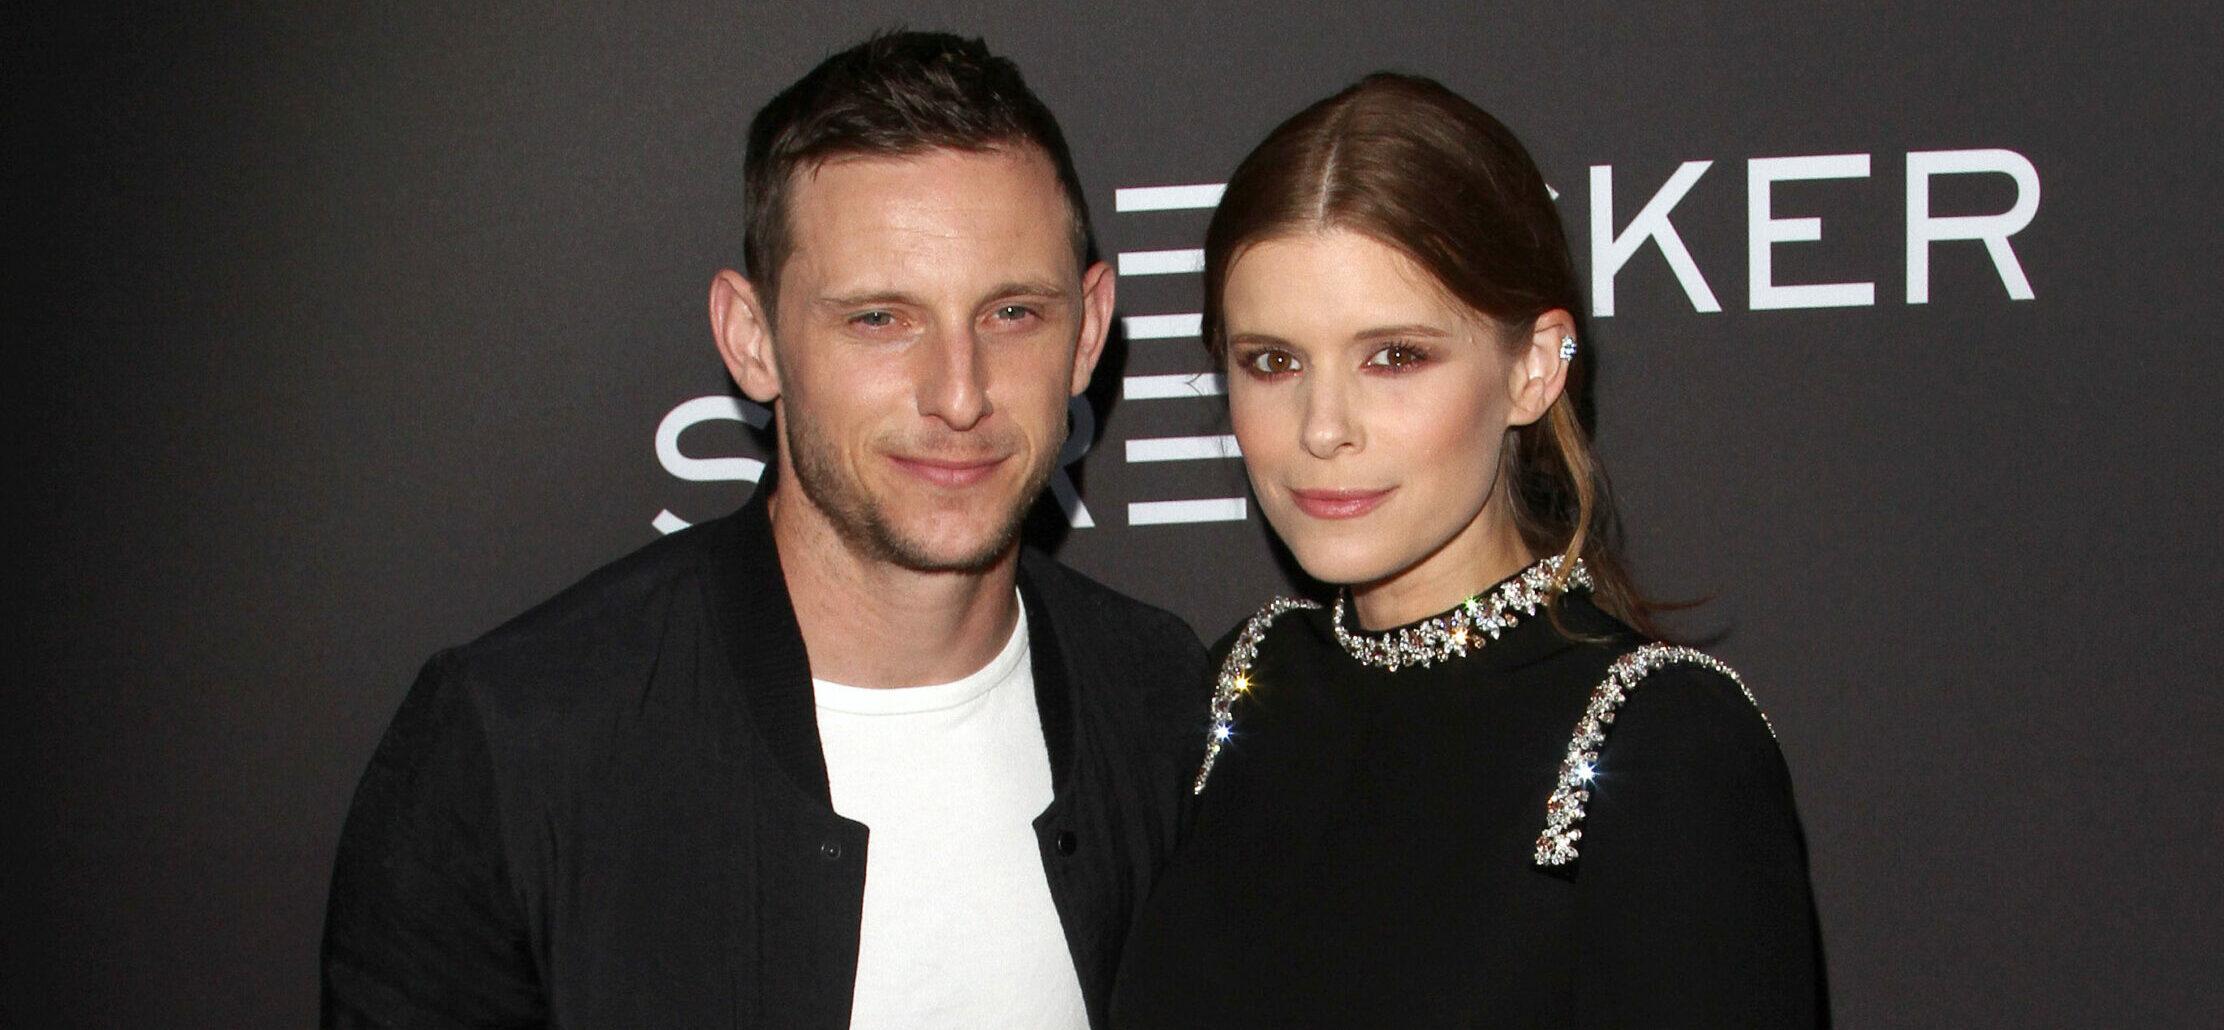 Teen Spirit Special Screening at The Arclight Cinemas in Hollywood on 04/02/2019. 02 Apr 2019 Pictured: Kate Mara, Jamie Bell.